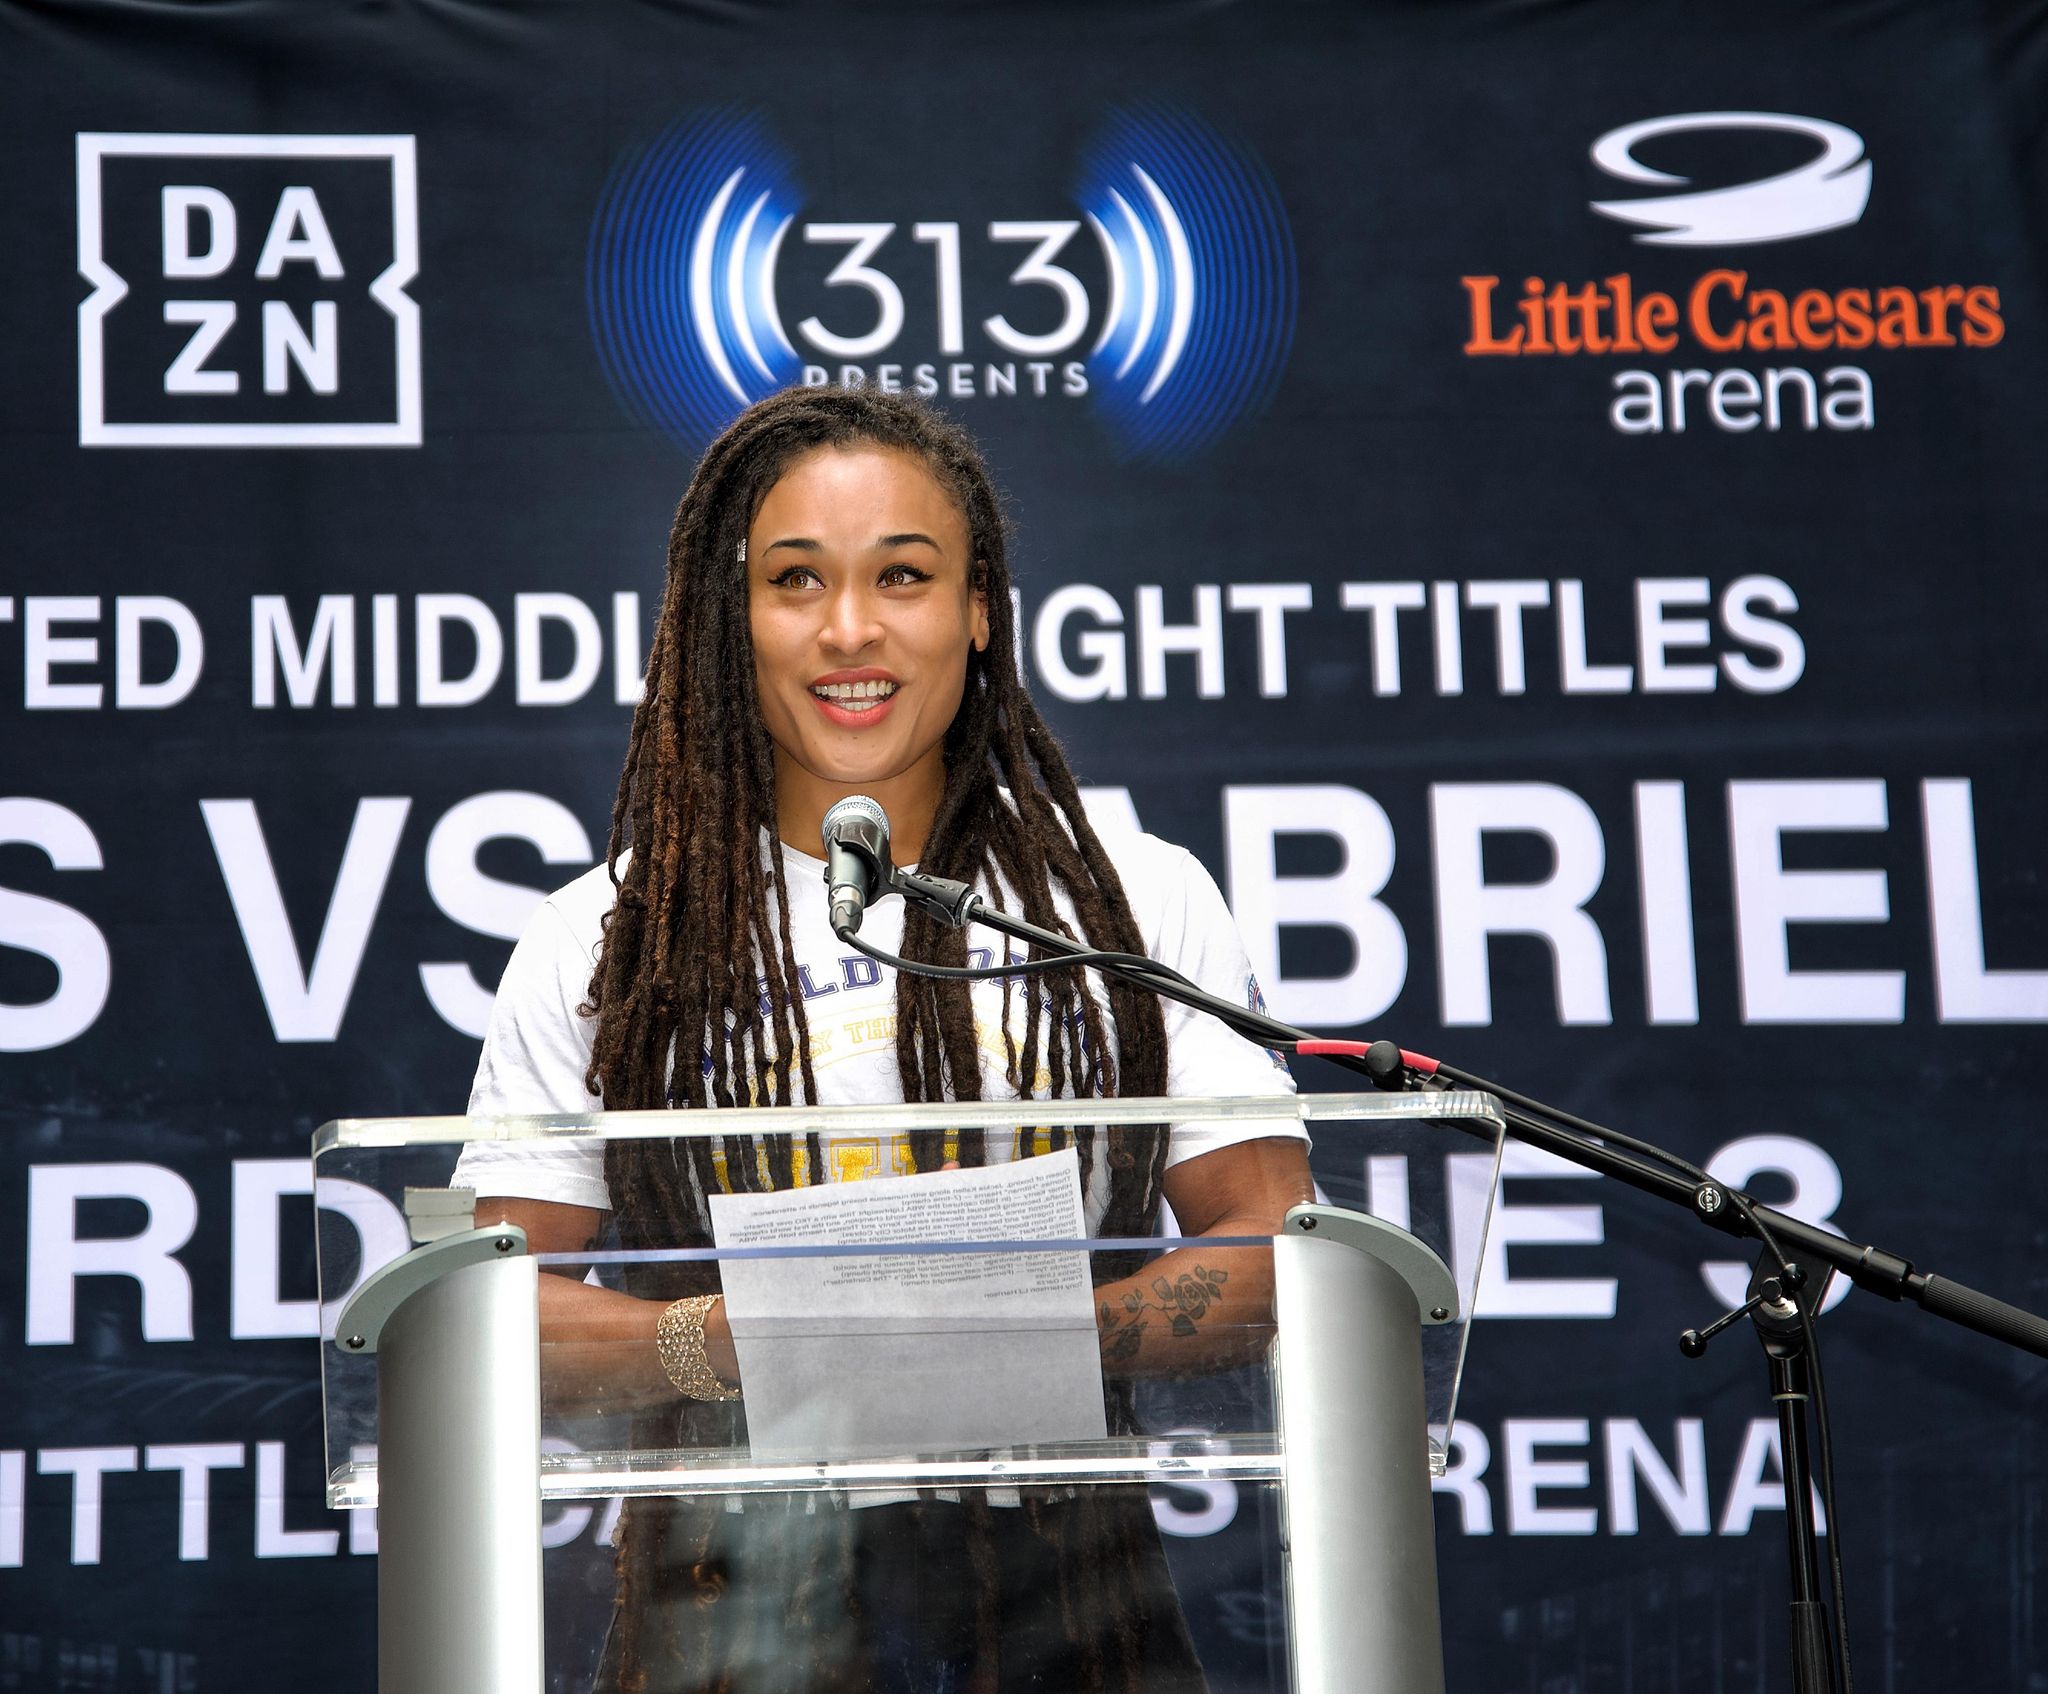 Hanna Gabriels fights for pride and heritage in her rematch against Claressa Shields